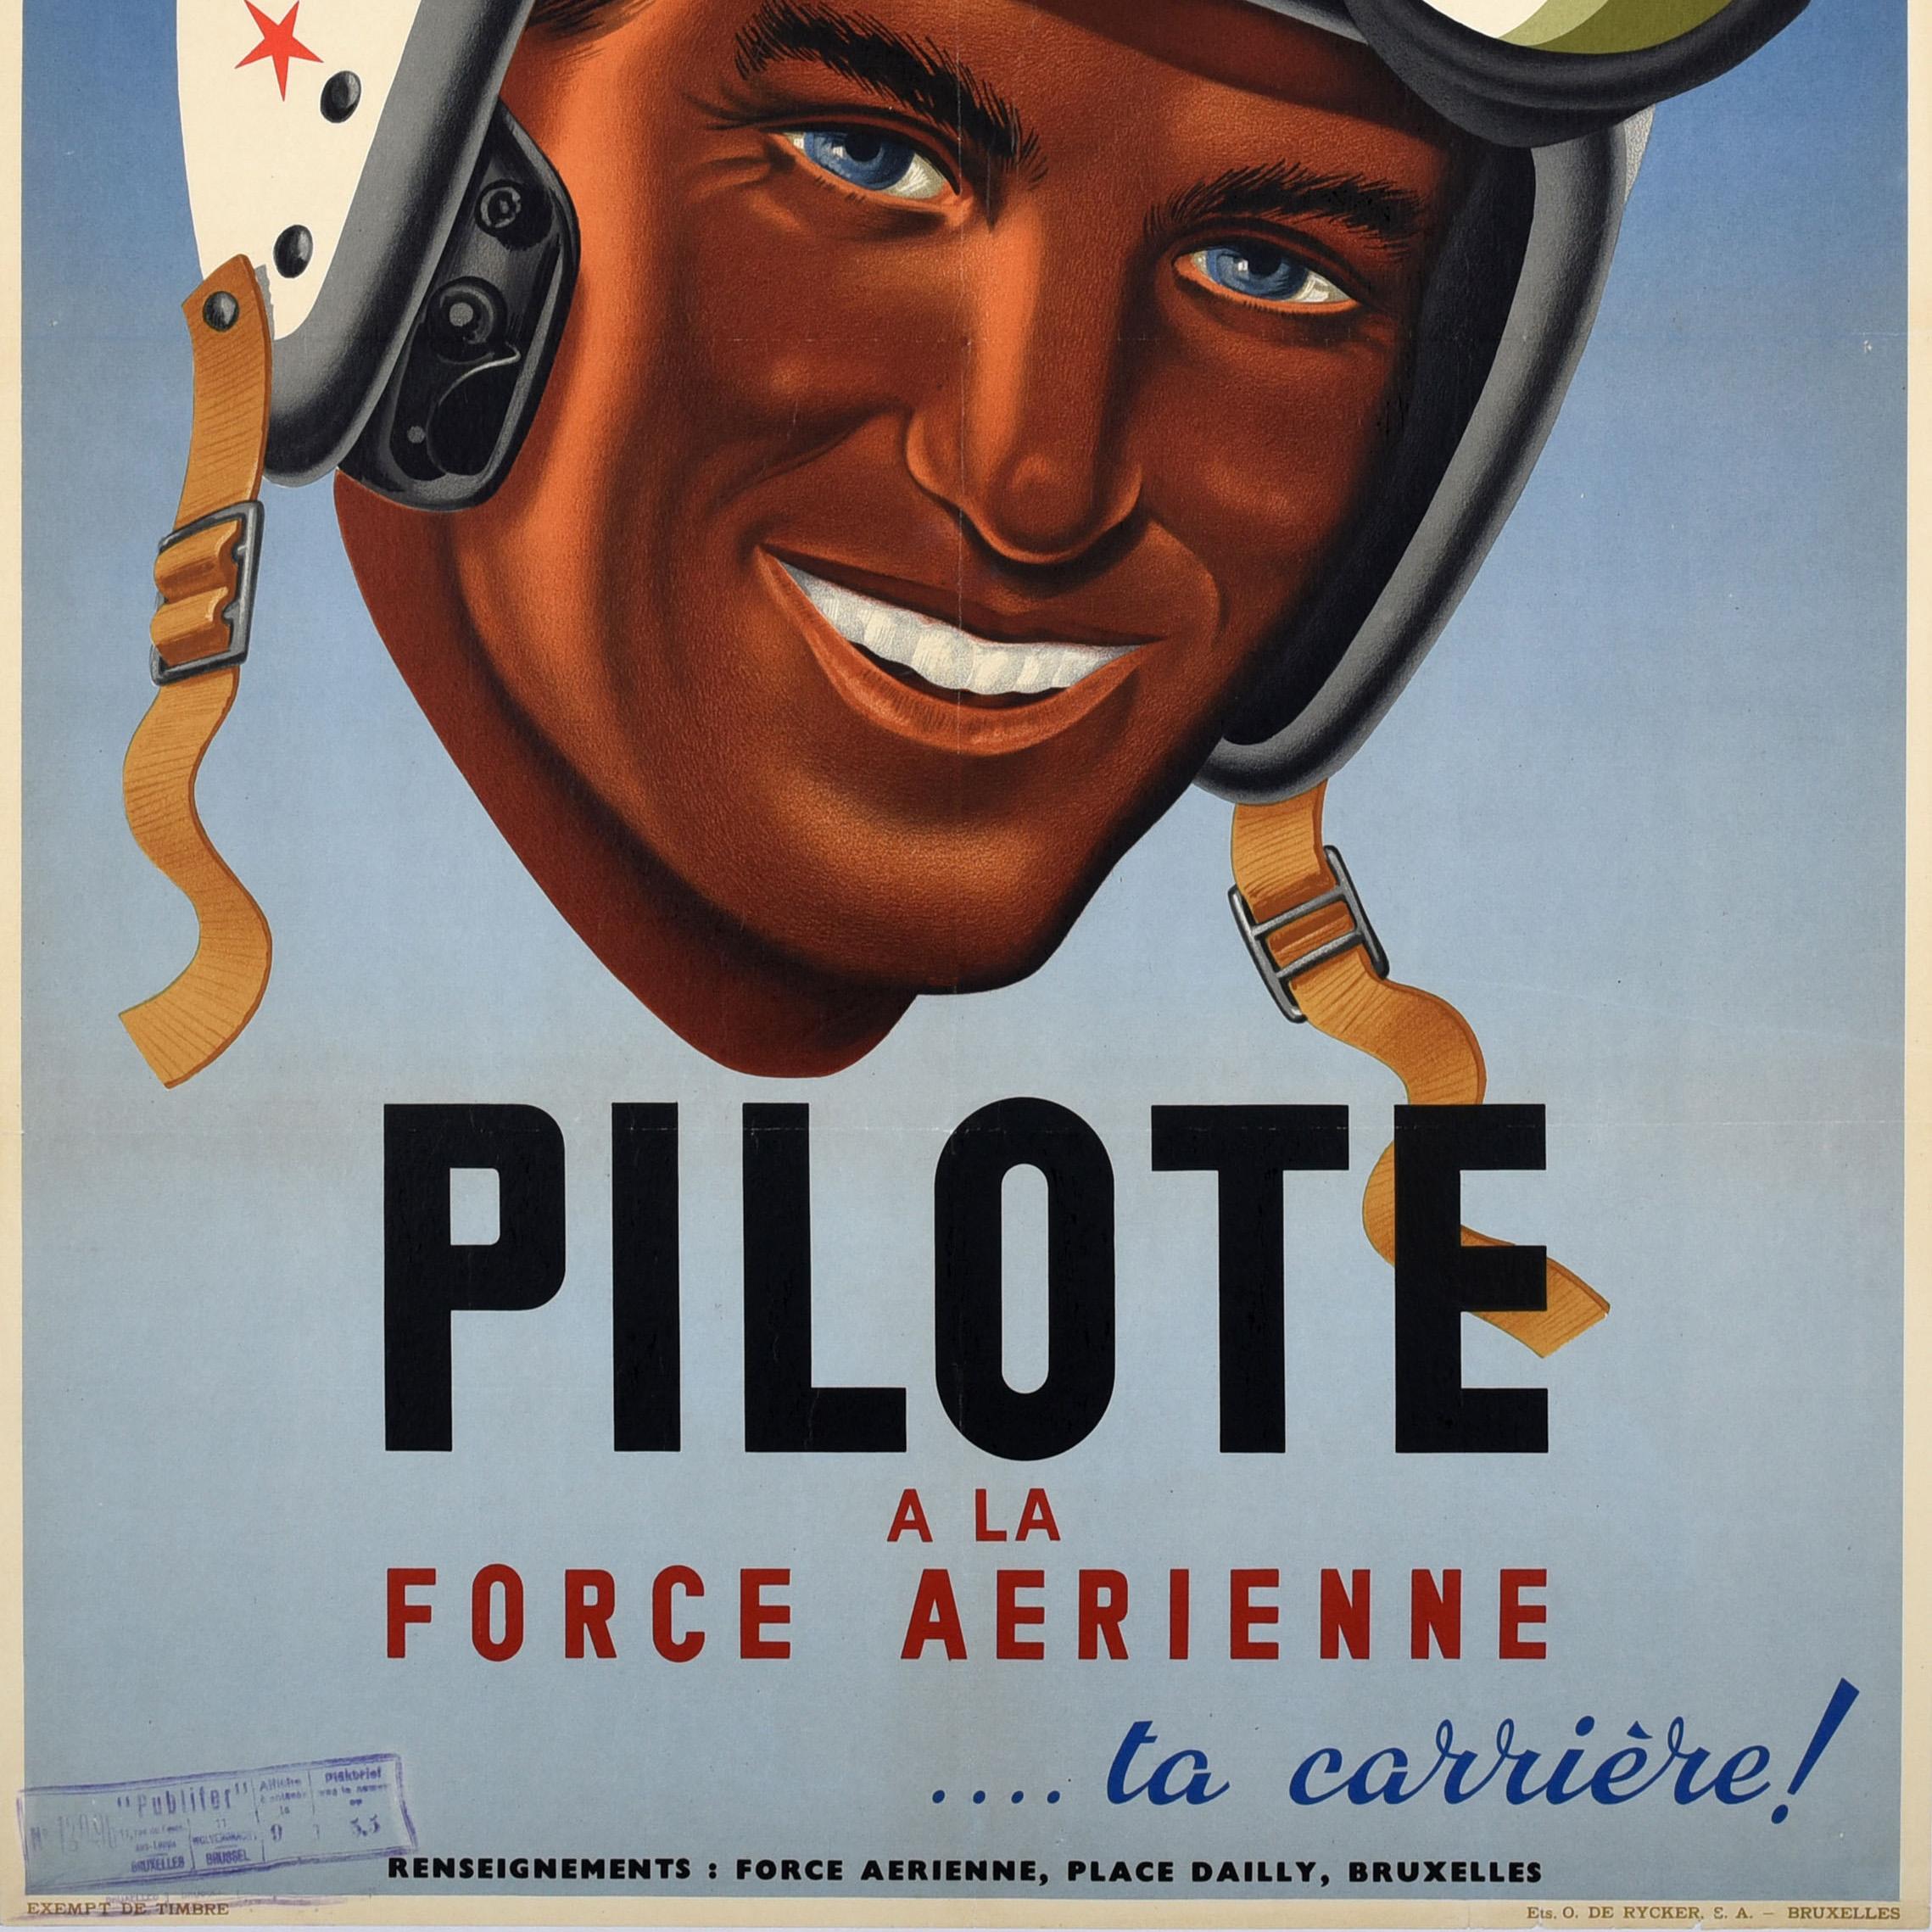 Original Vintage Recruitment Poster Air Force Pilot Belgium Force Aerienne Army In Good Condition For Sale In London, GB